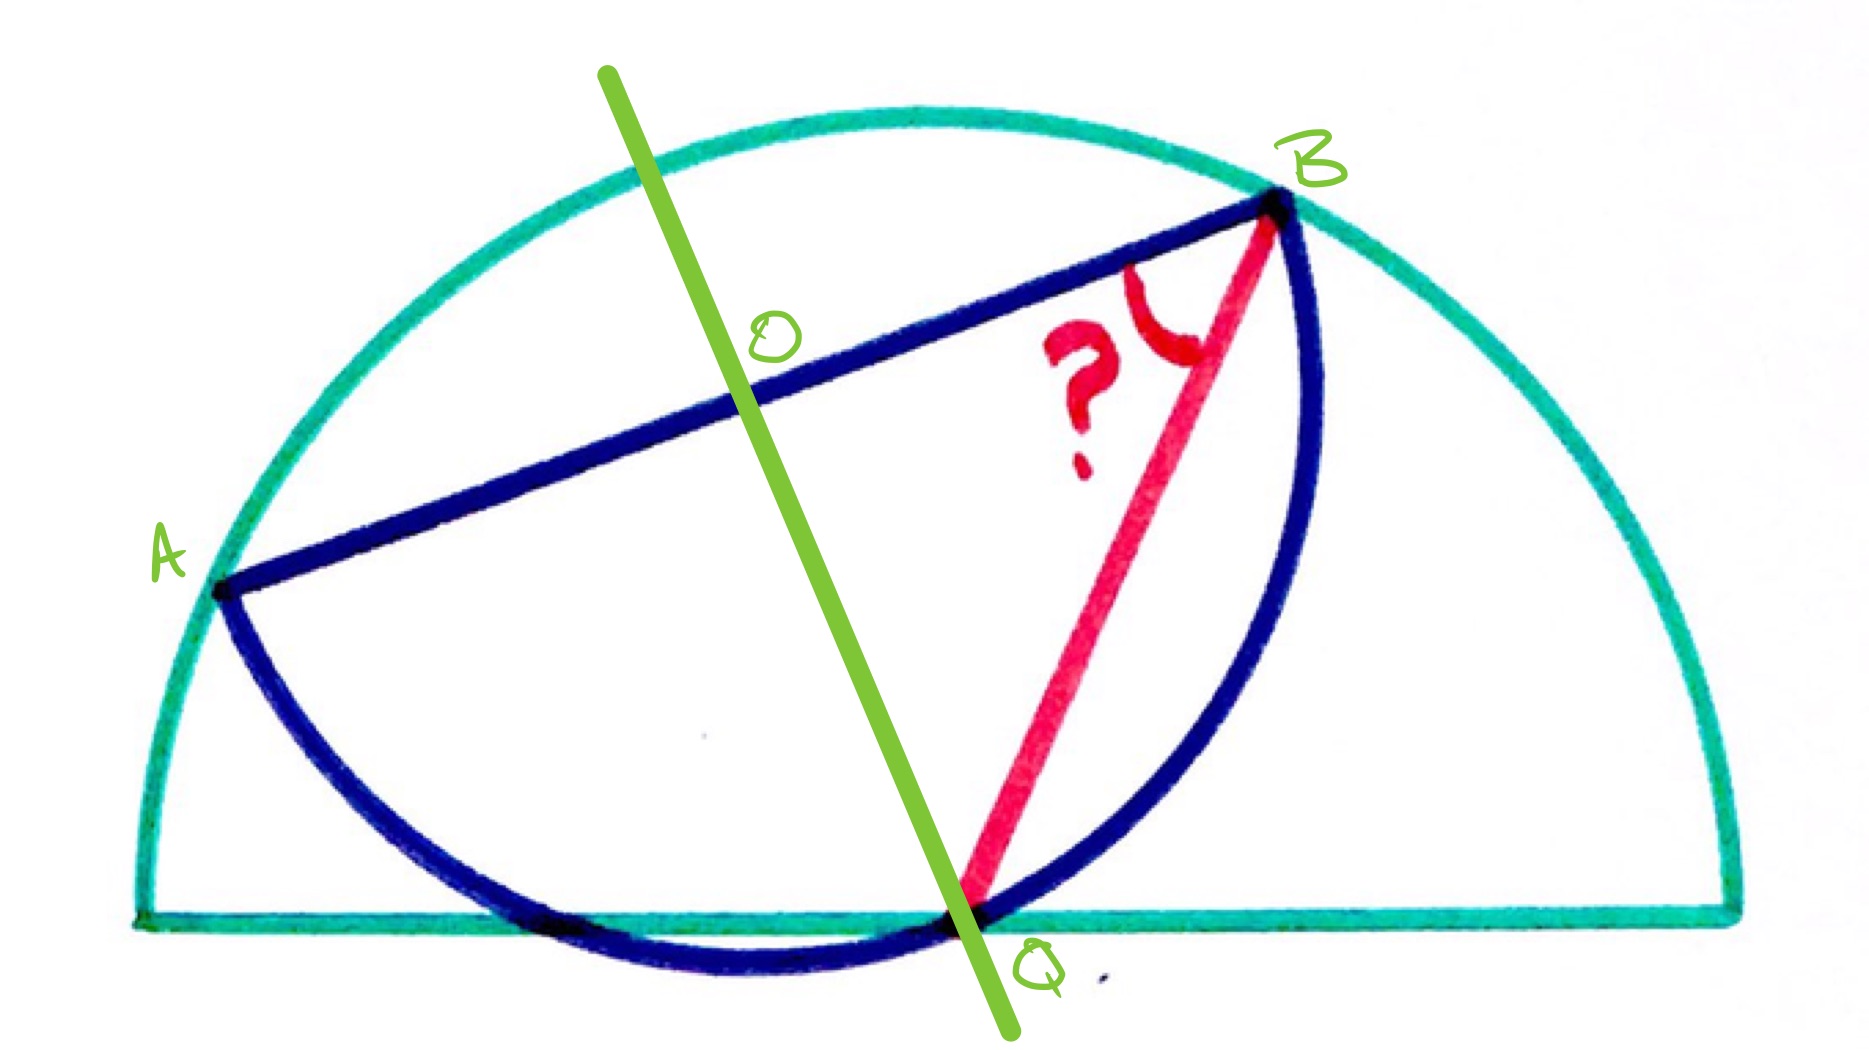 Two overlapping circles labelled